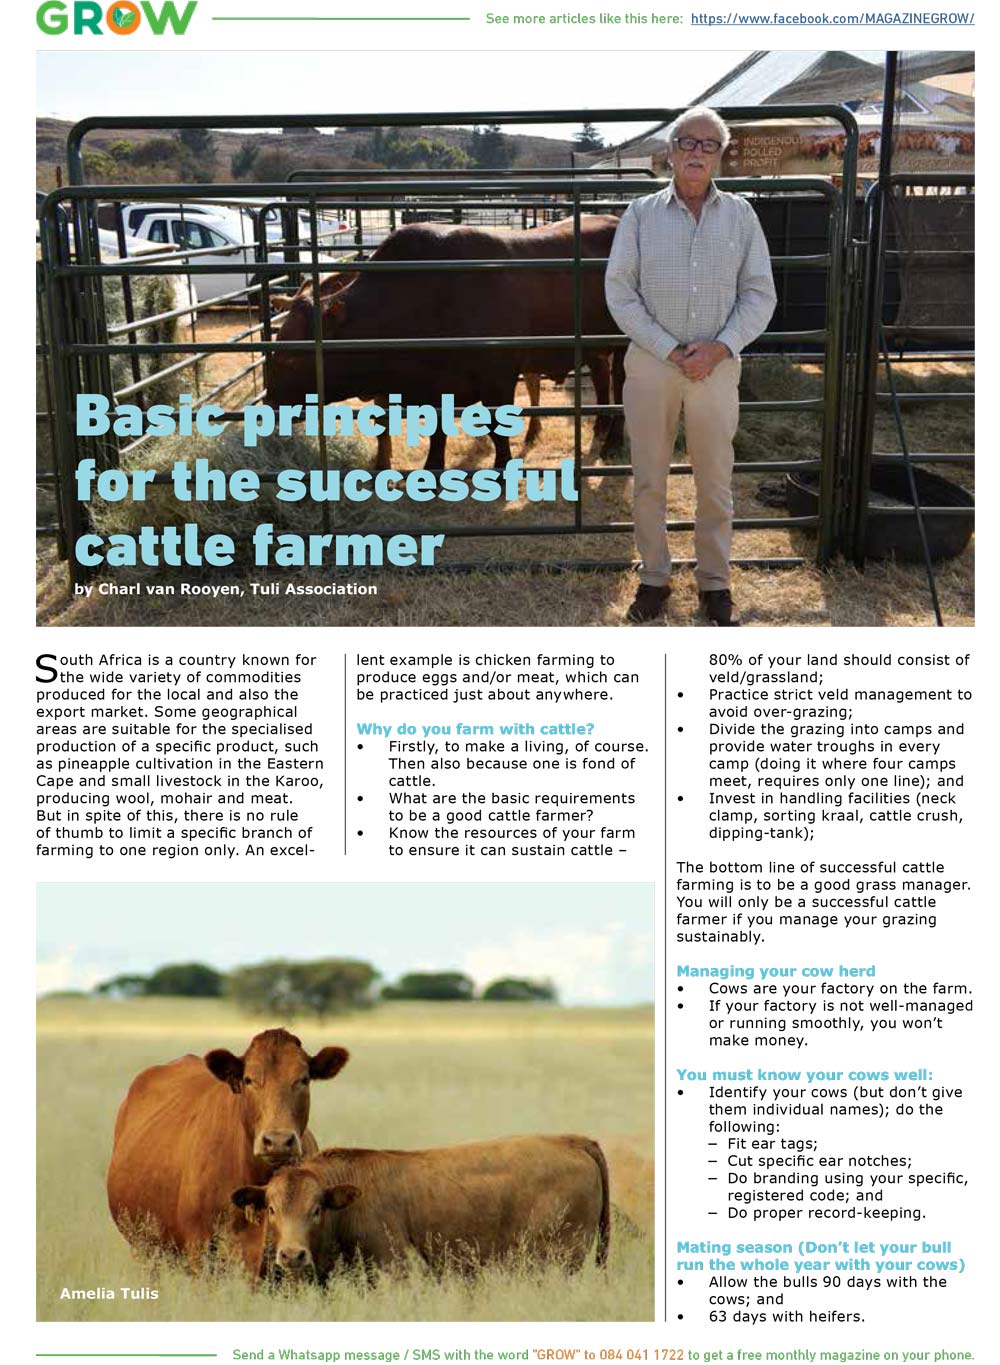 Basic principles for the successful cattle farmer